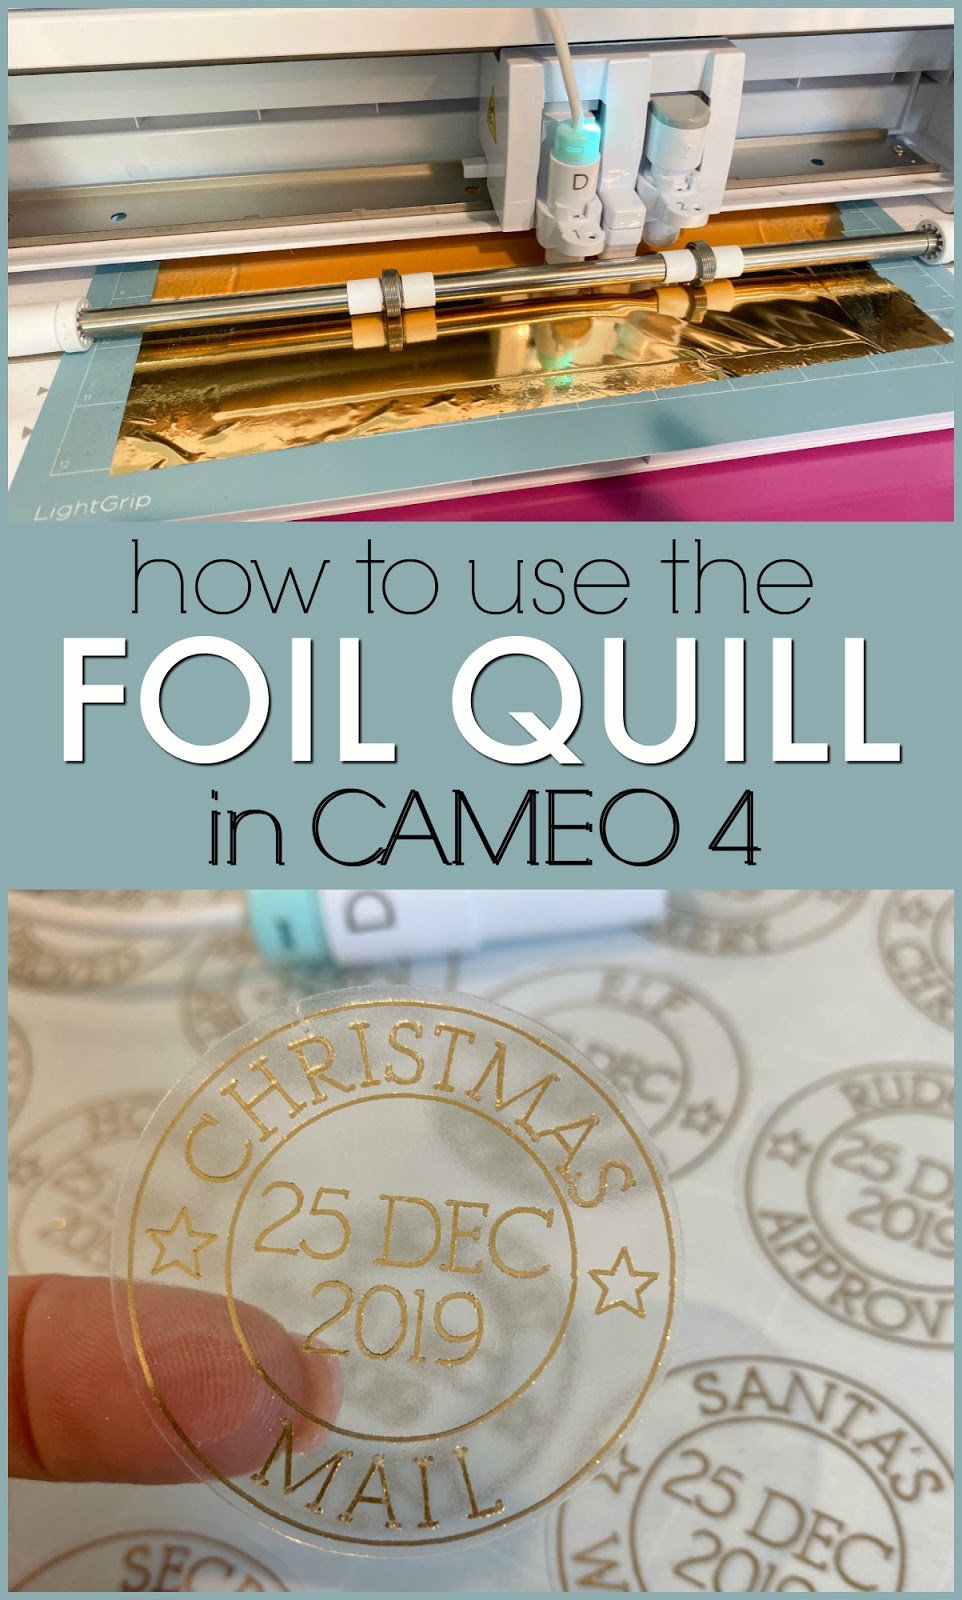 How to Use Foil Quill in Silhouette CAMEO 4 (Plus Best Cut